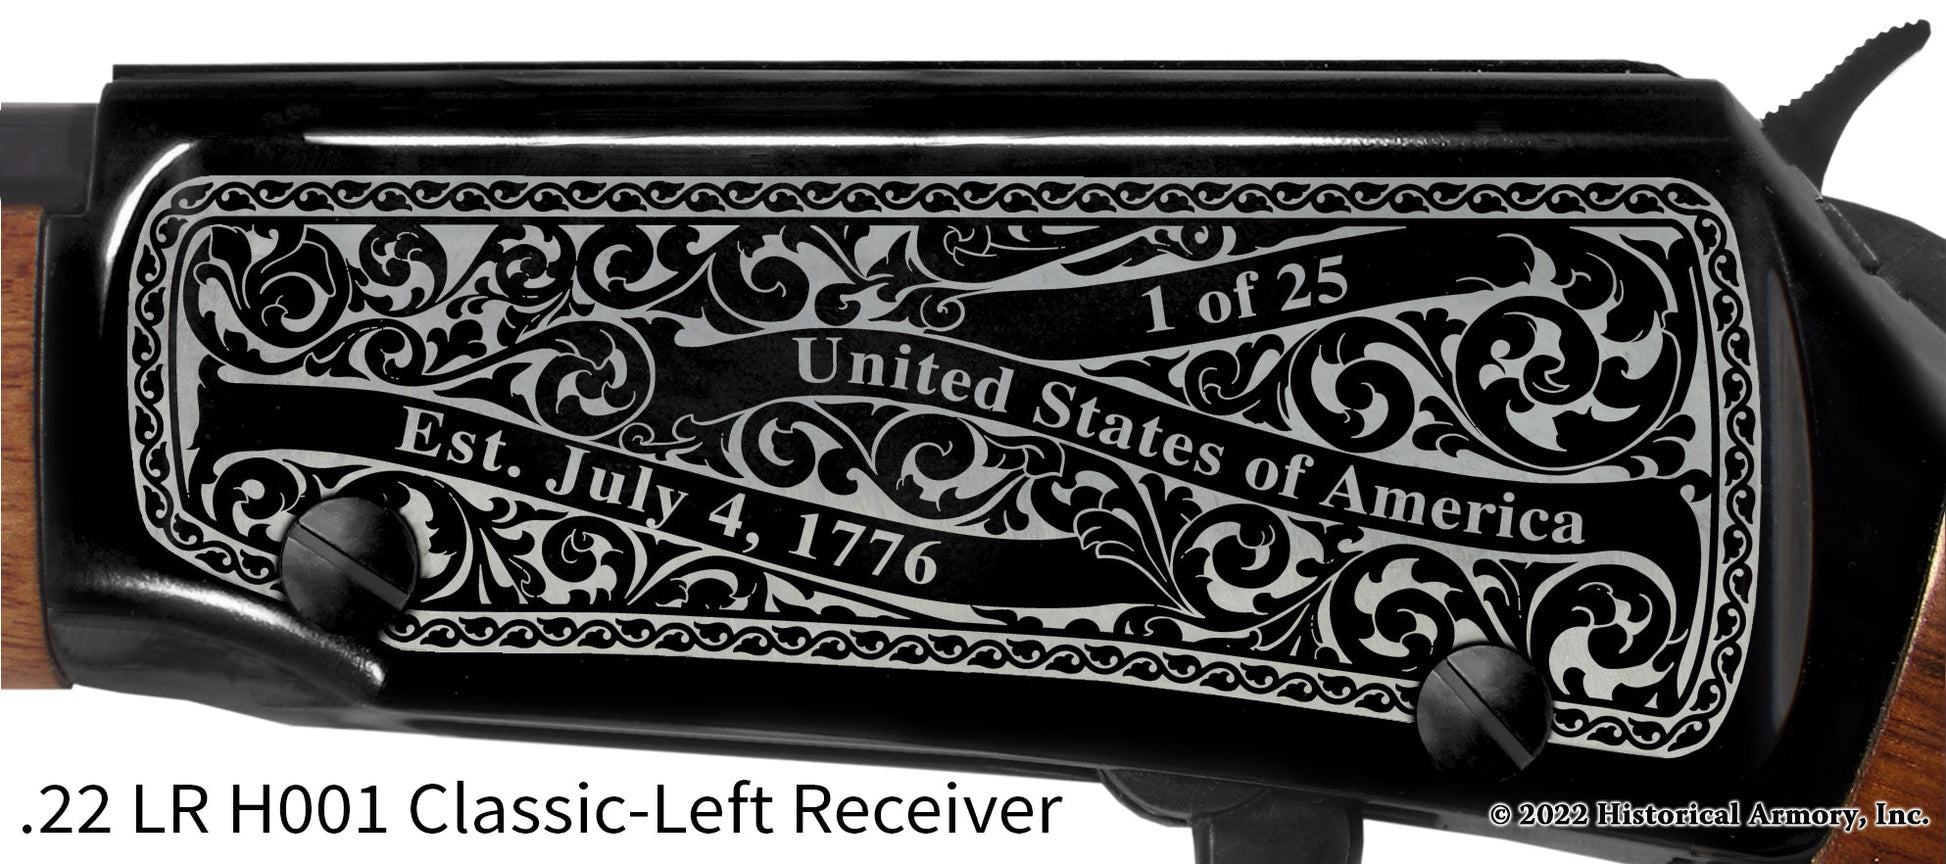 Marion County Ohio Engraved Henry H001 Rifle